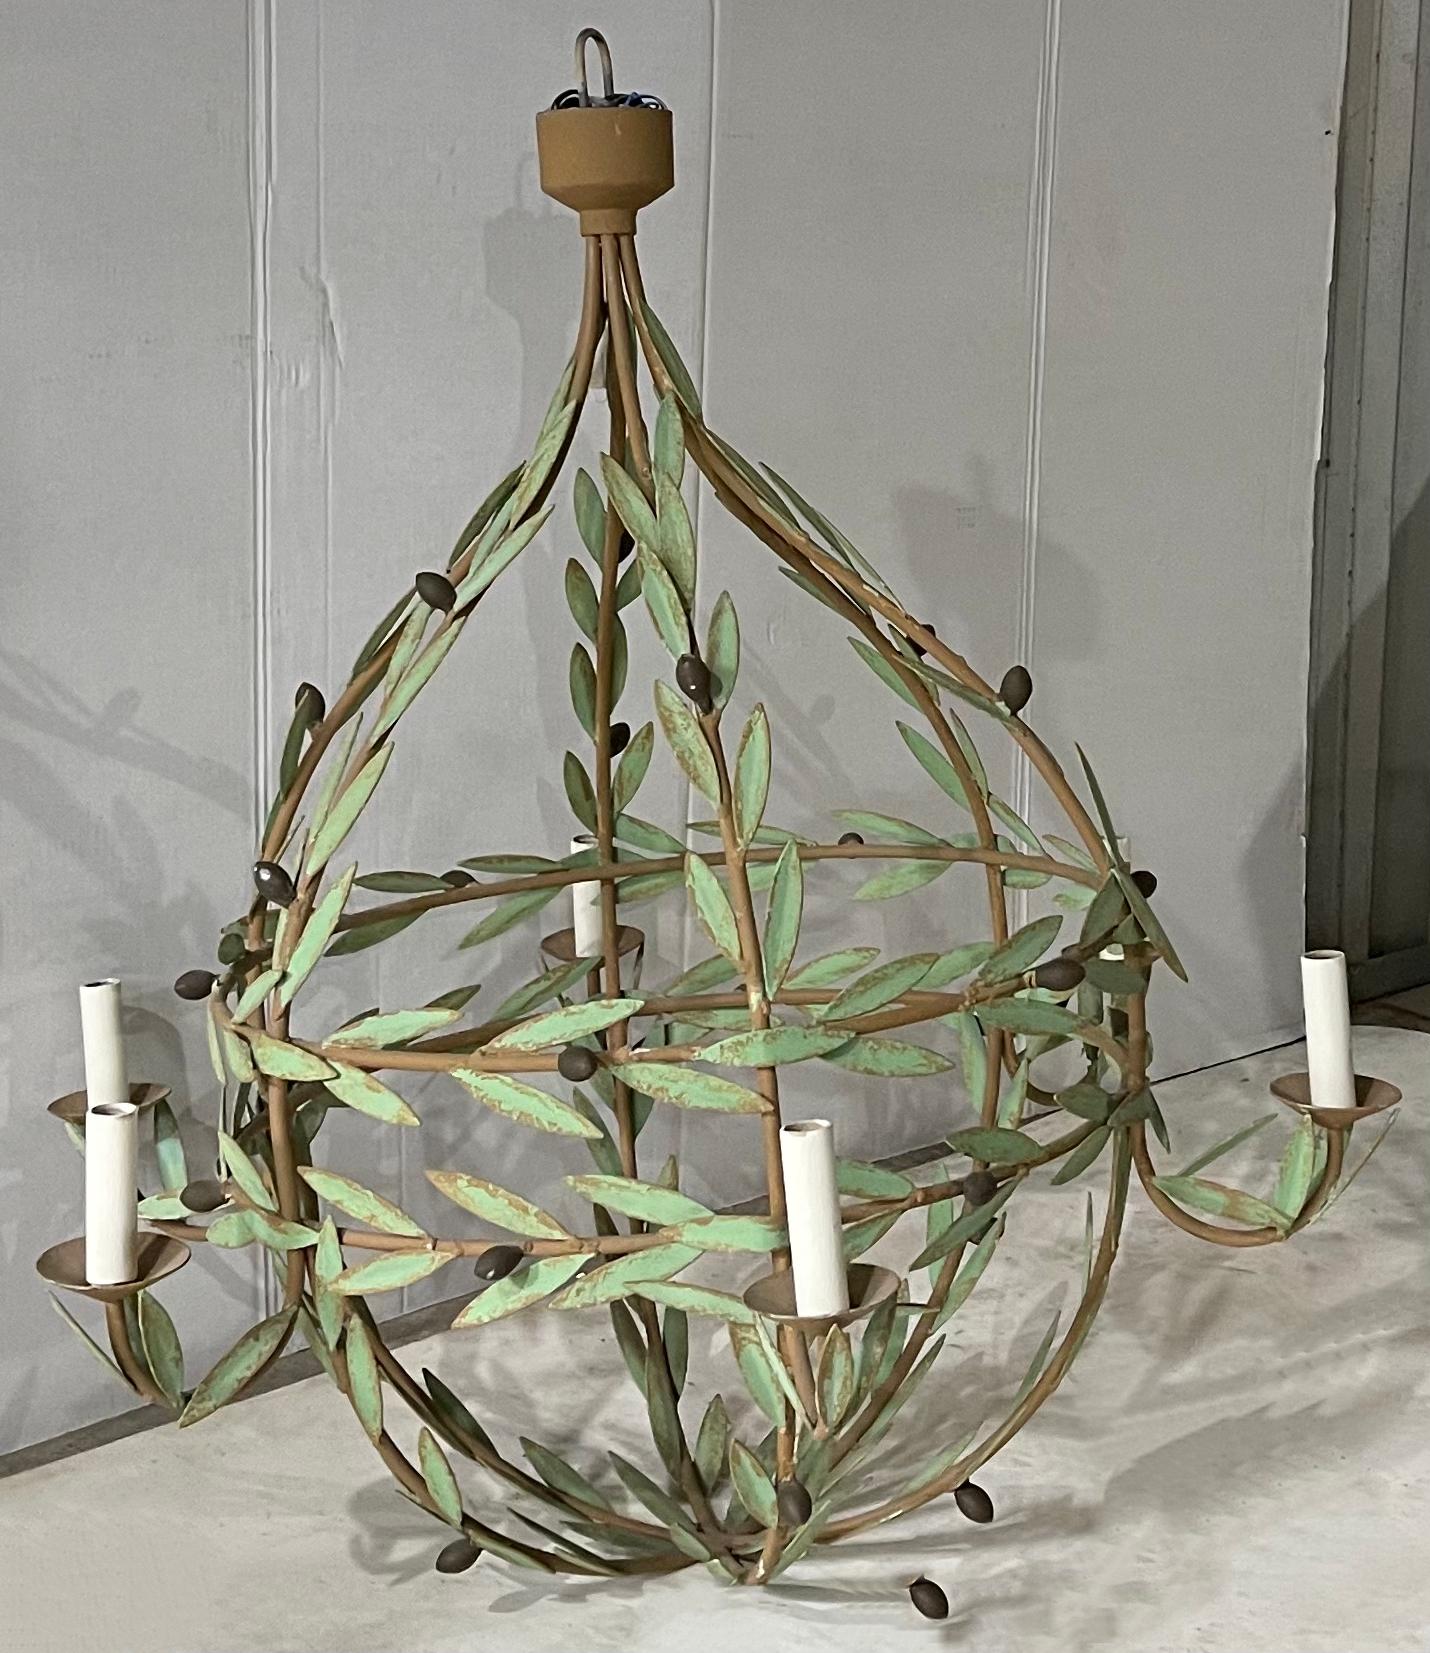 This is amazing! I have never seen this style before this one! This is a large scale tole chandelier with olive branches wrapping the frame horizontally and vertically. It is a mid-century find, and the leaves show some wear. There are six arms, and